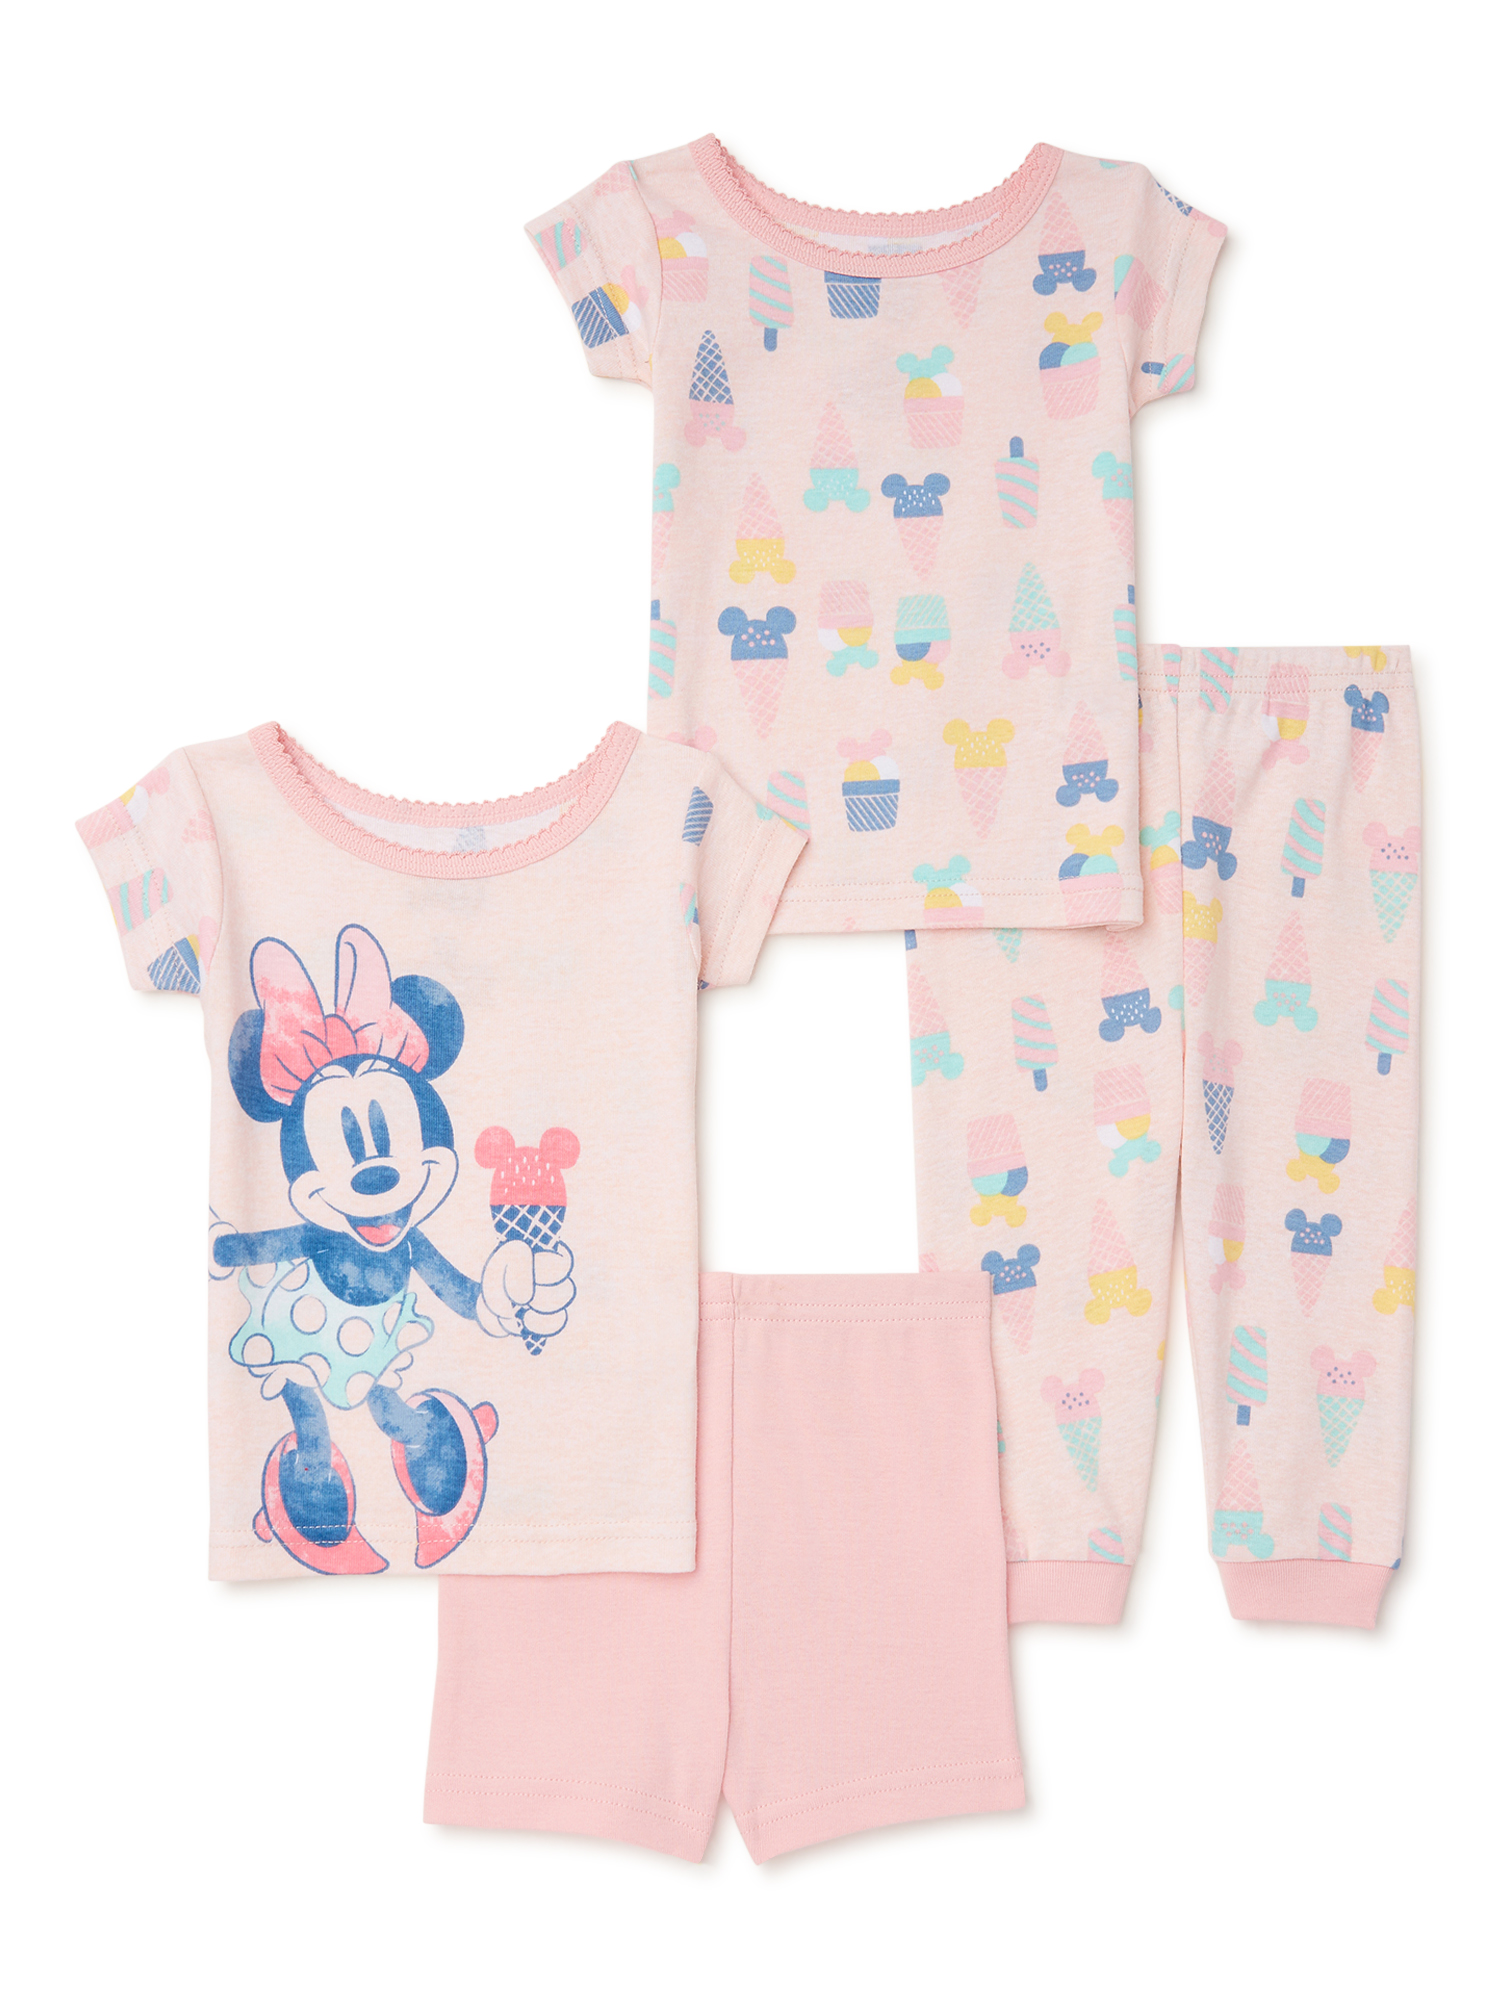 Disney Minnie Mouse Baby and Toddler Girls Tops, Pants and Shorts, 4-Piece Cotton Pajama Set, Sizes 9M-24M - image 1 of 4